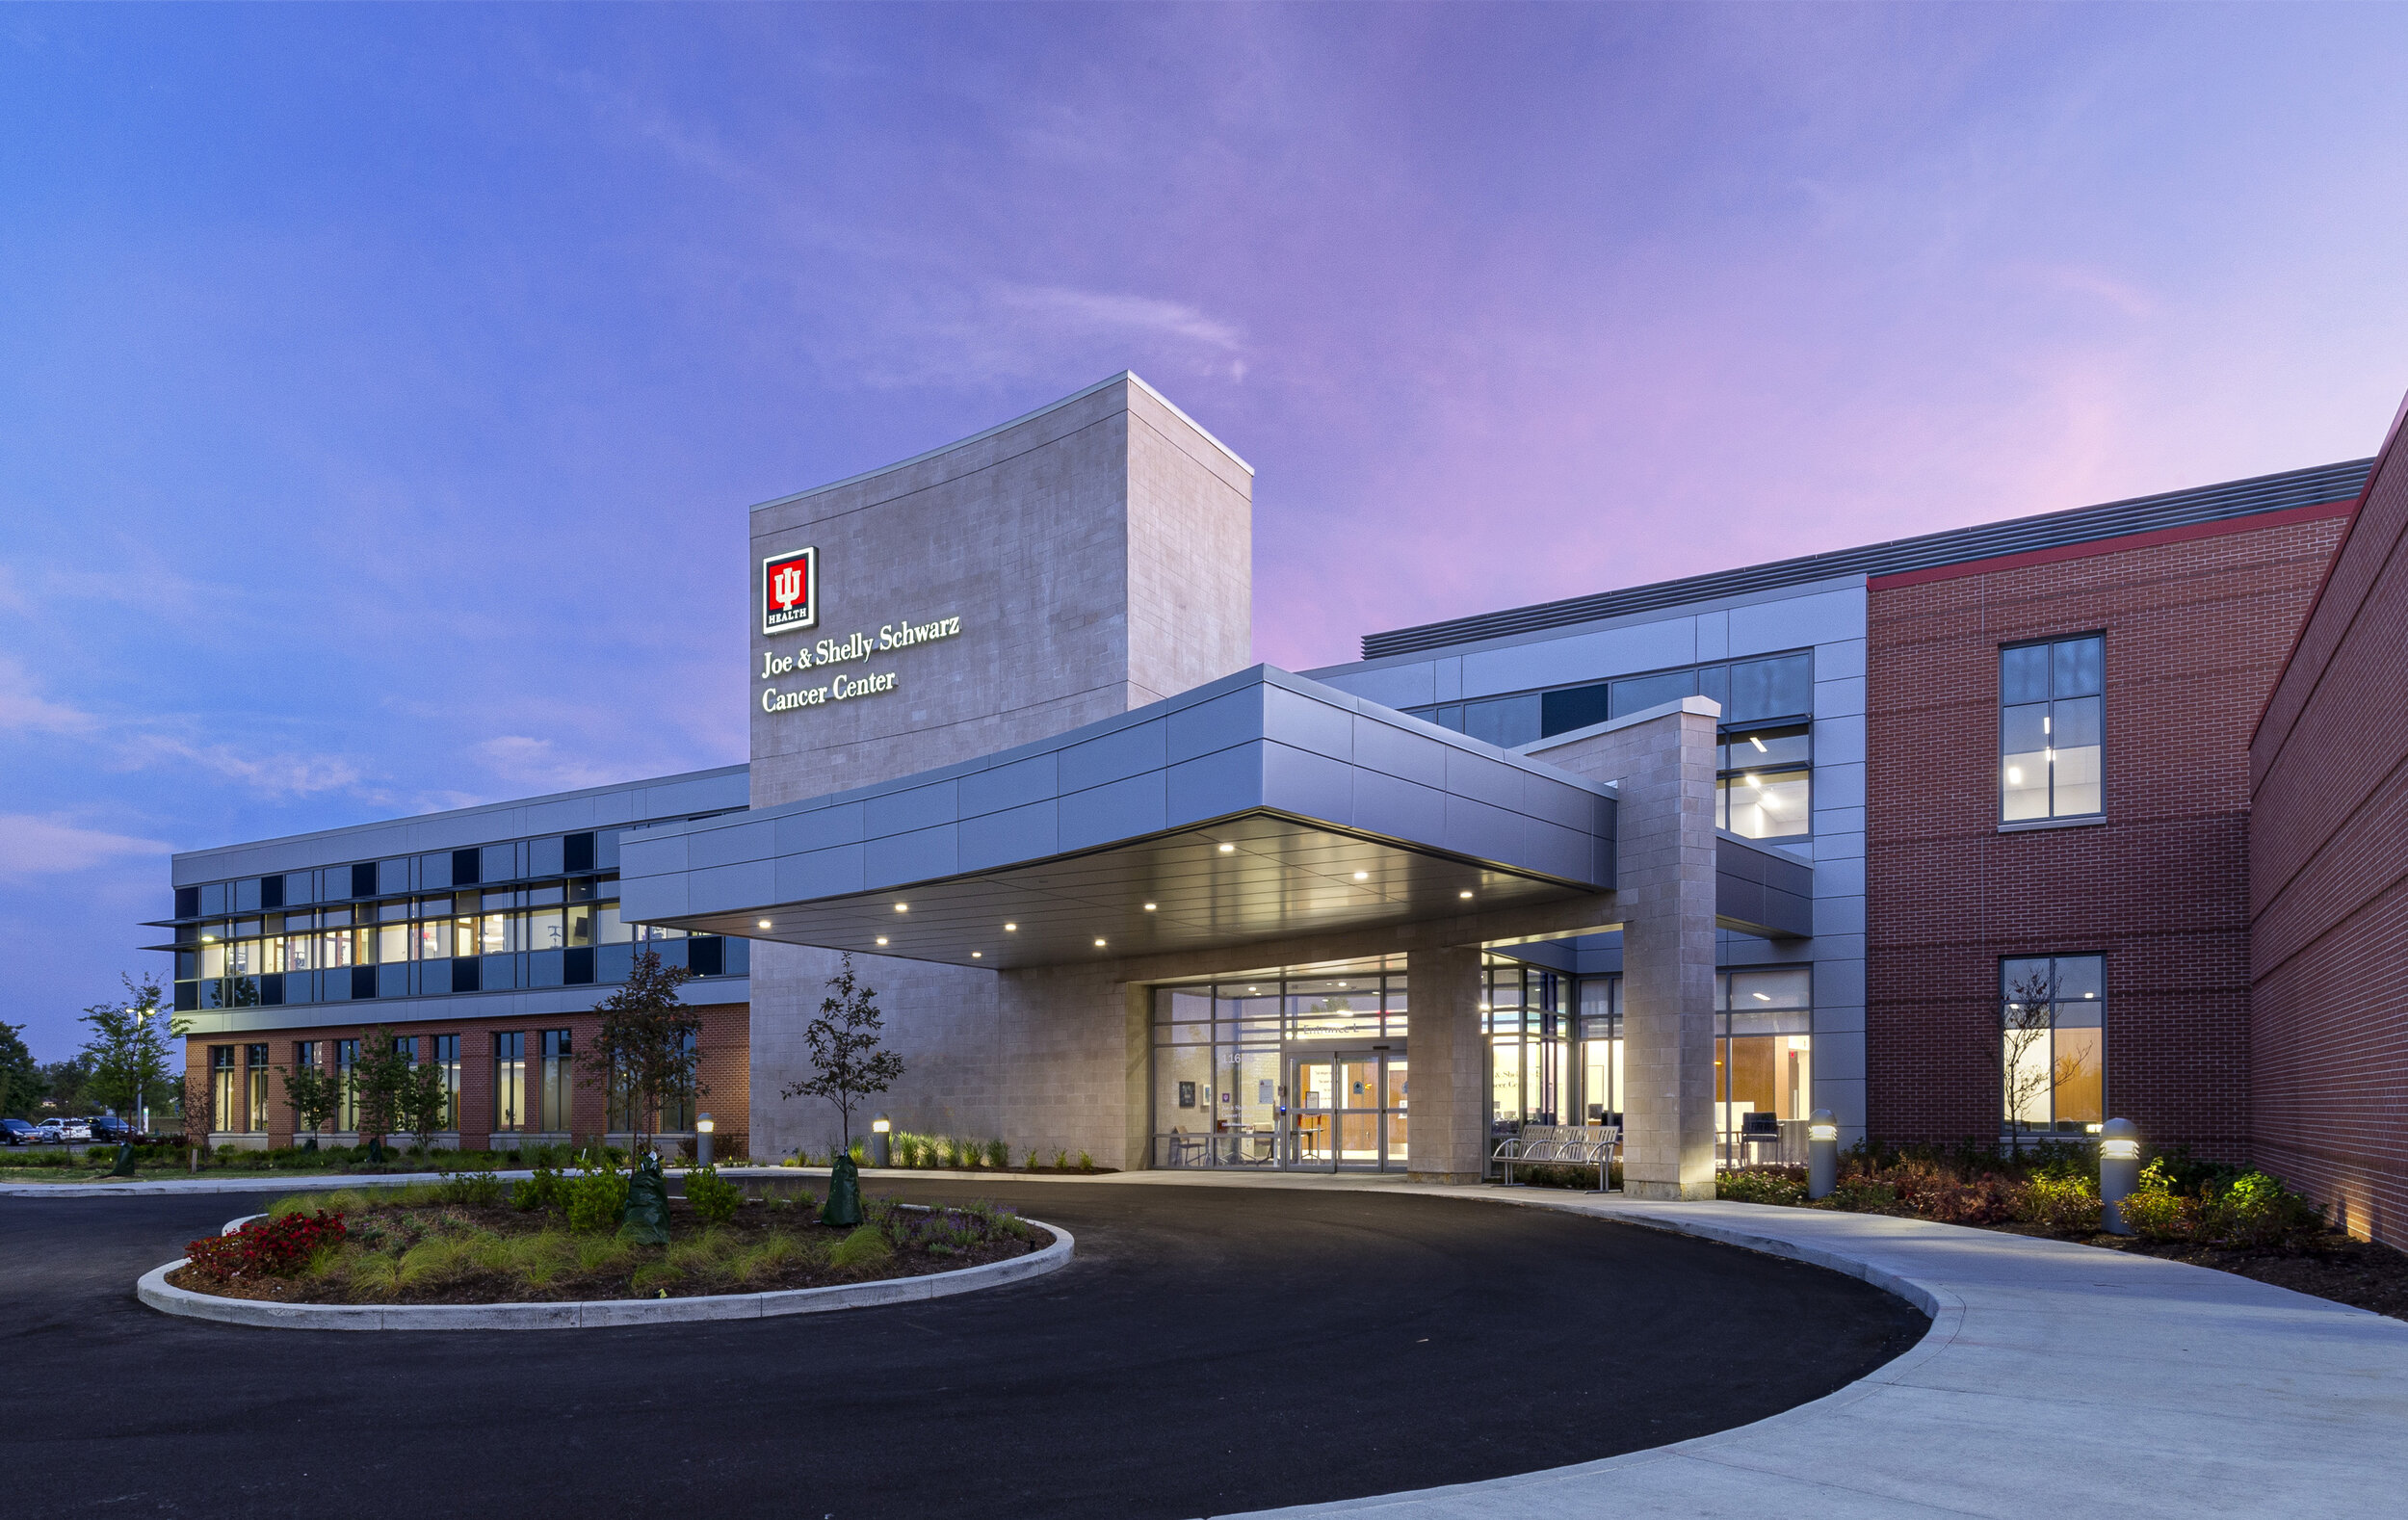 Photograph of the Schwarz Cancer Center, taken by architectural photographer Al Ensley.